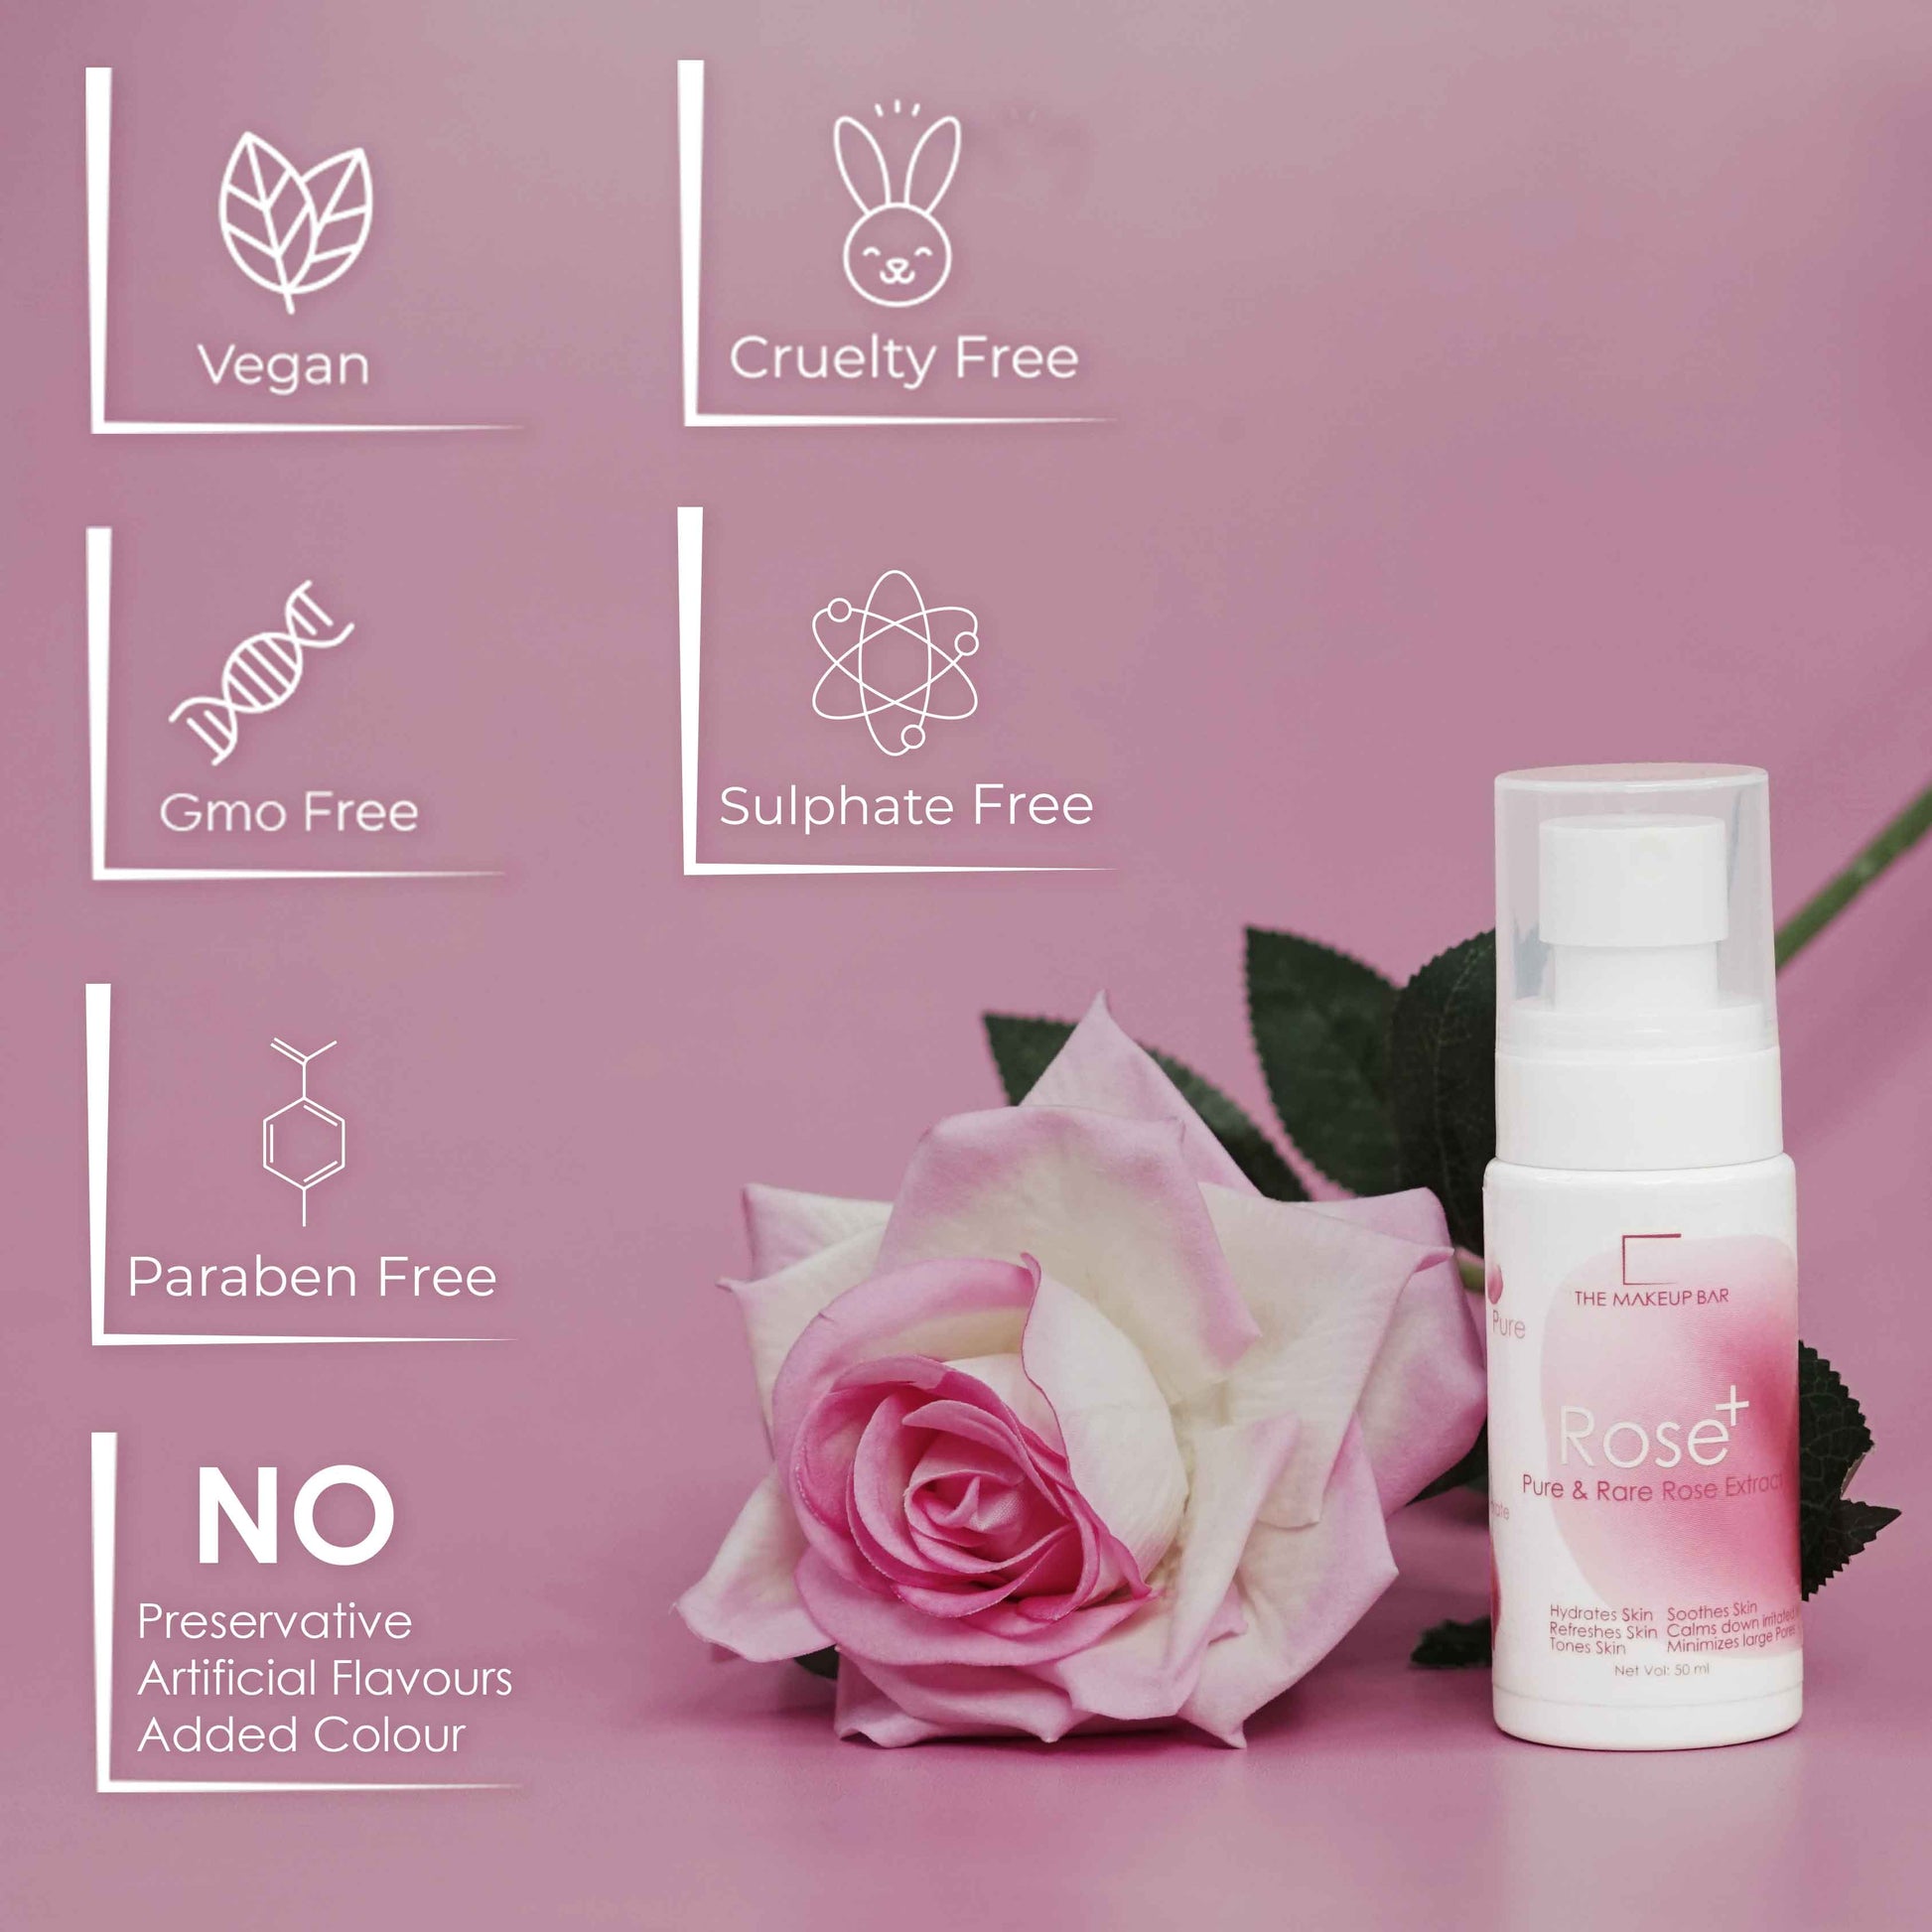 Rose water, Organic rose water mist, Natural rose water sprayOrganic beauty products, Natural skincare Rose water toner Facial hydration spray Refreshing rose mistRose water benefits, Hydrating facial mist, Rose water for skin,